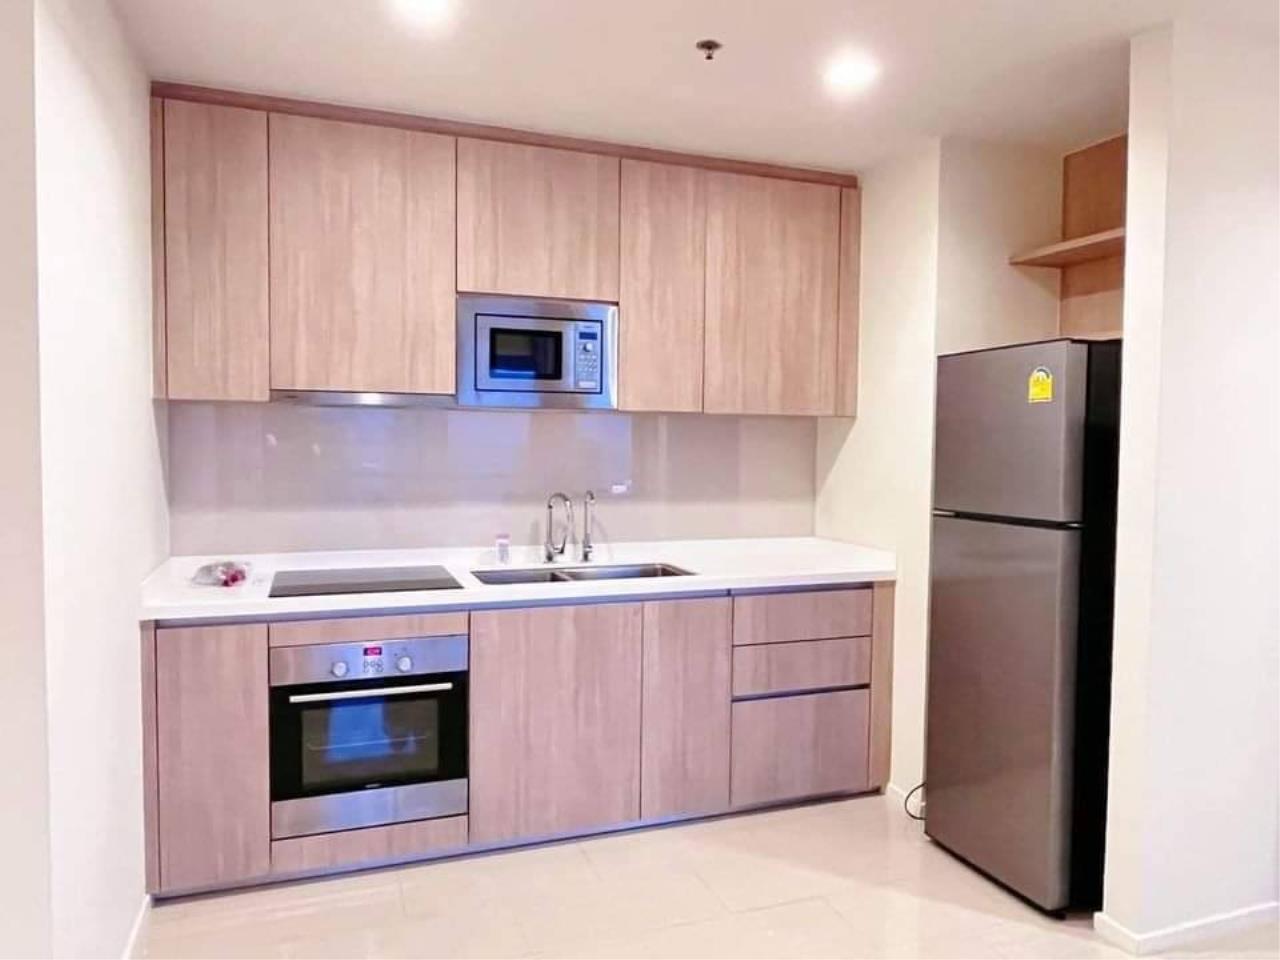 2 bedrooms 2 bathrooms circle living prototype for rent